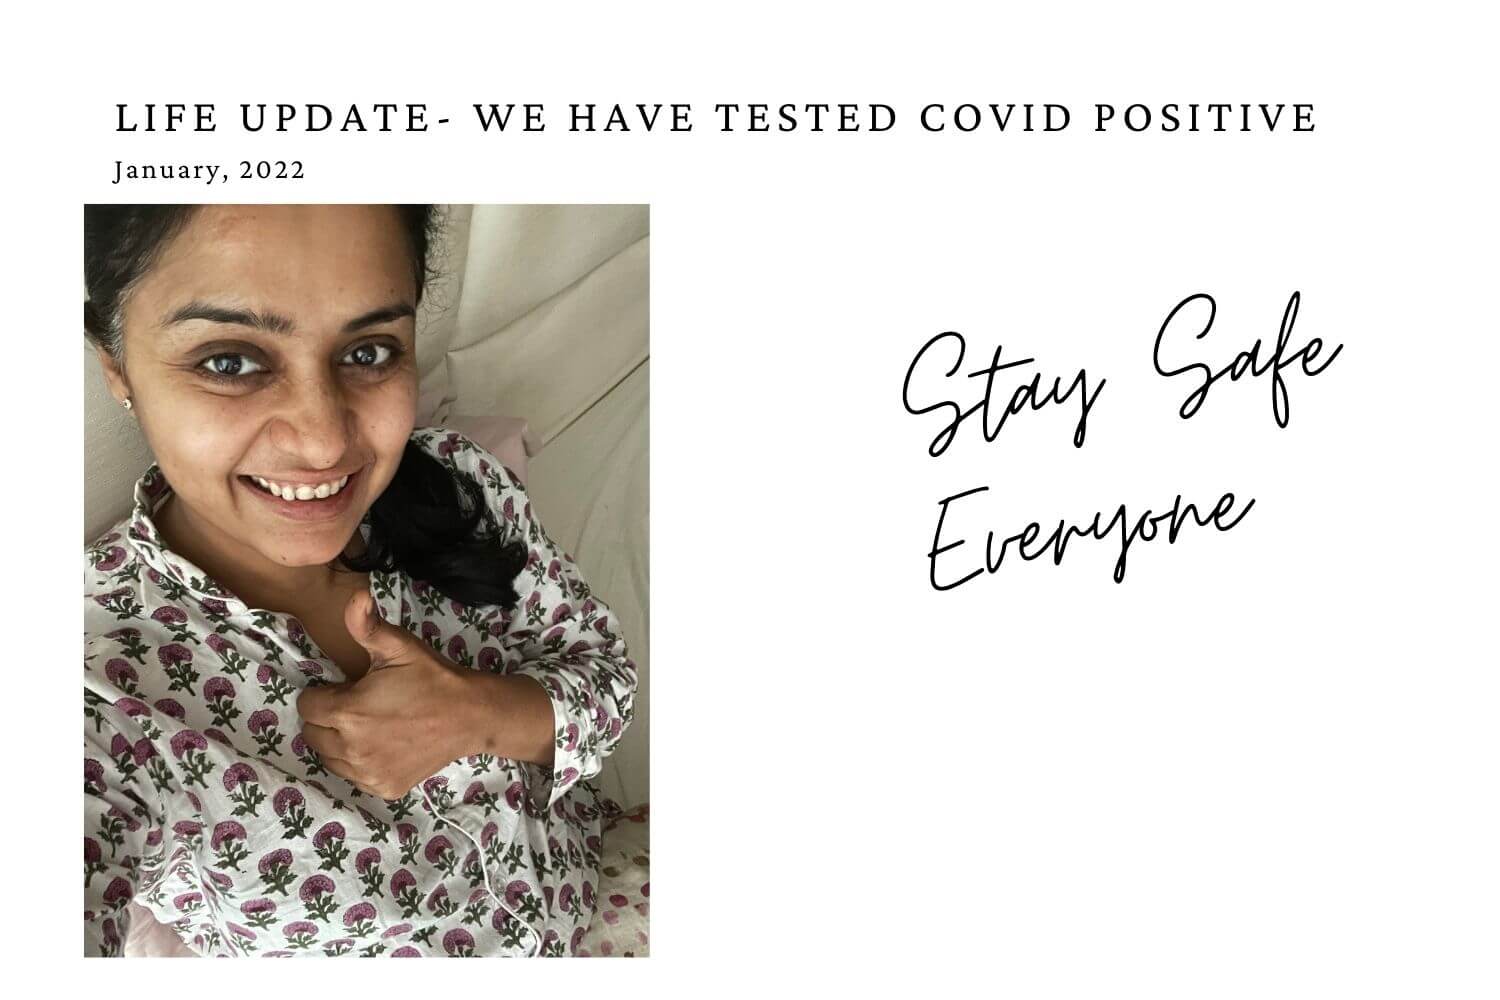 Life Update January 2022 - We Have Tested Covid Positive